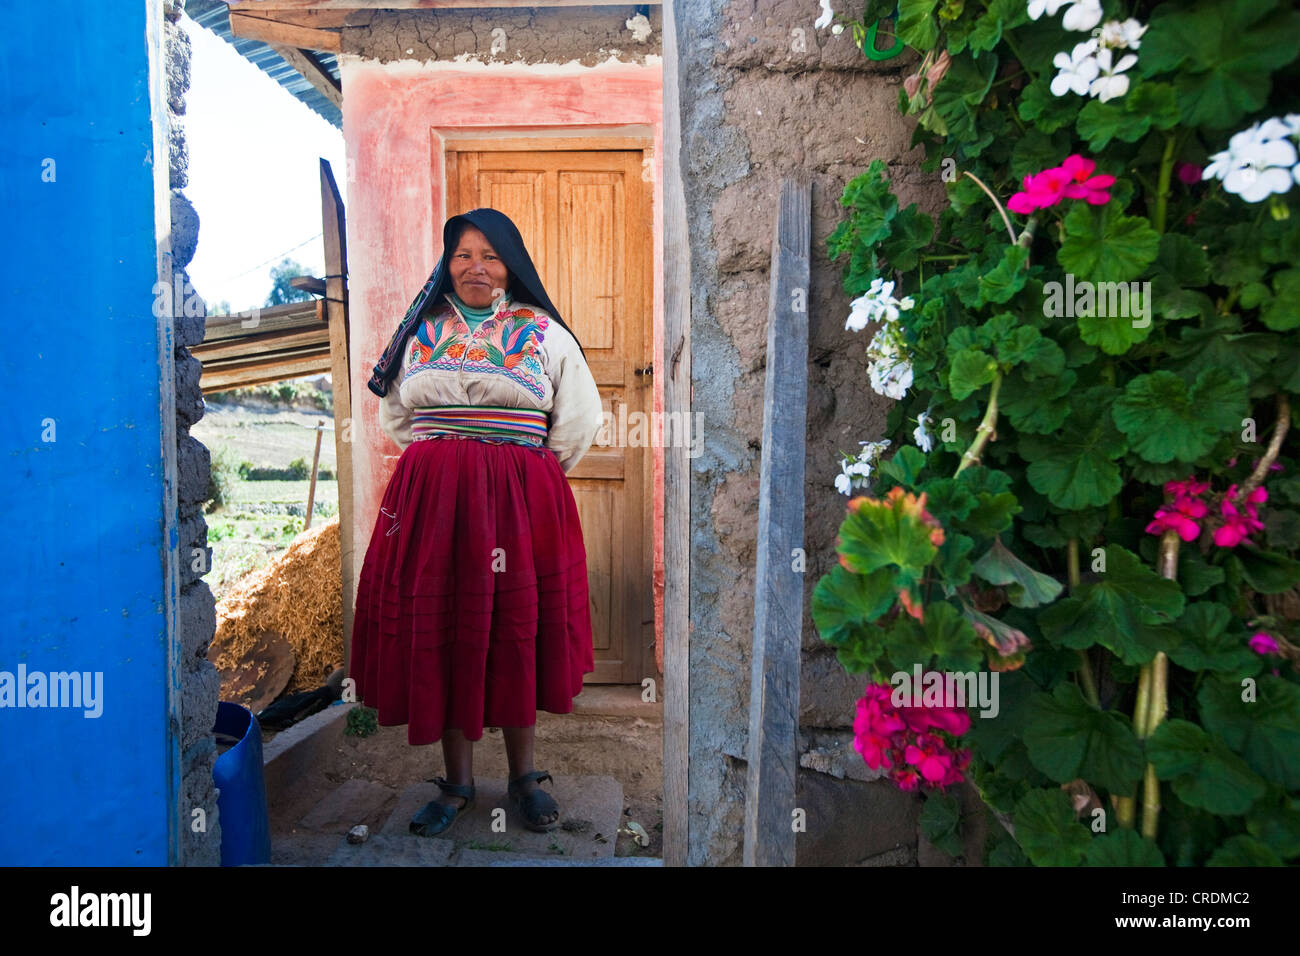 Woman wearing the traditional clothing of the Amantani-Quechua people, Amantani, Peru, South America Stock Photo